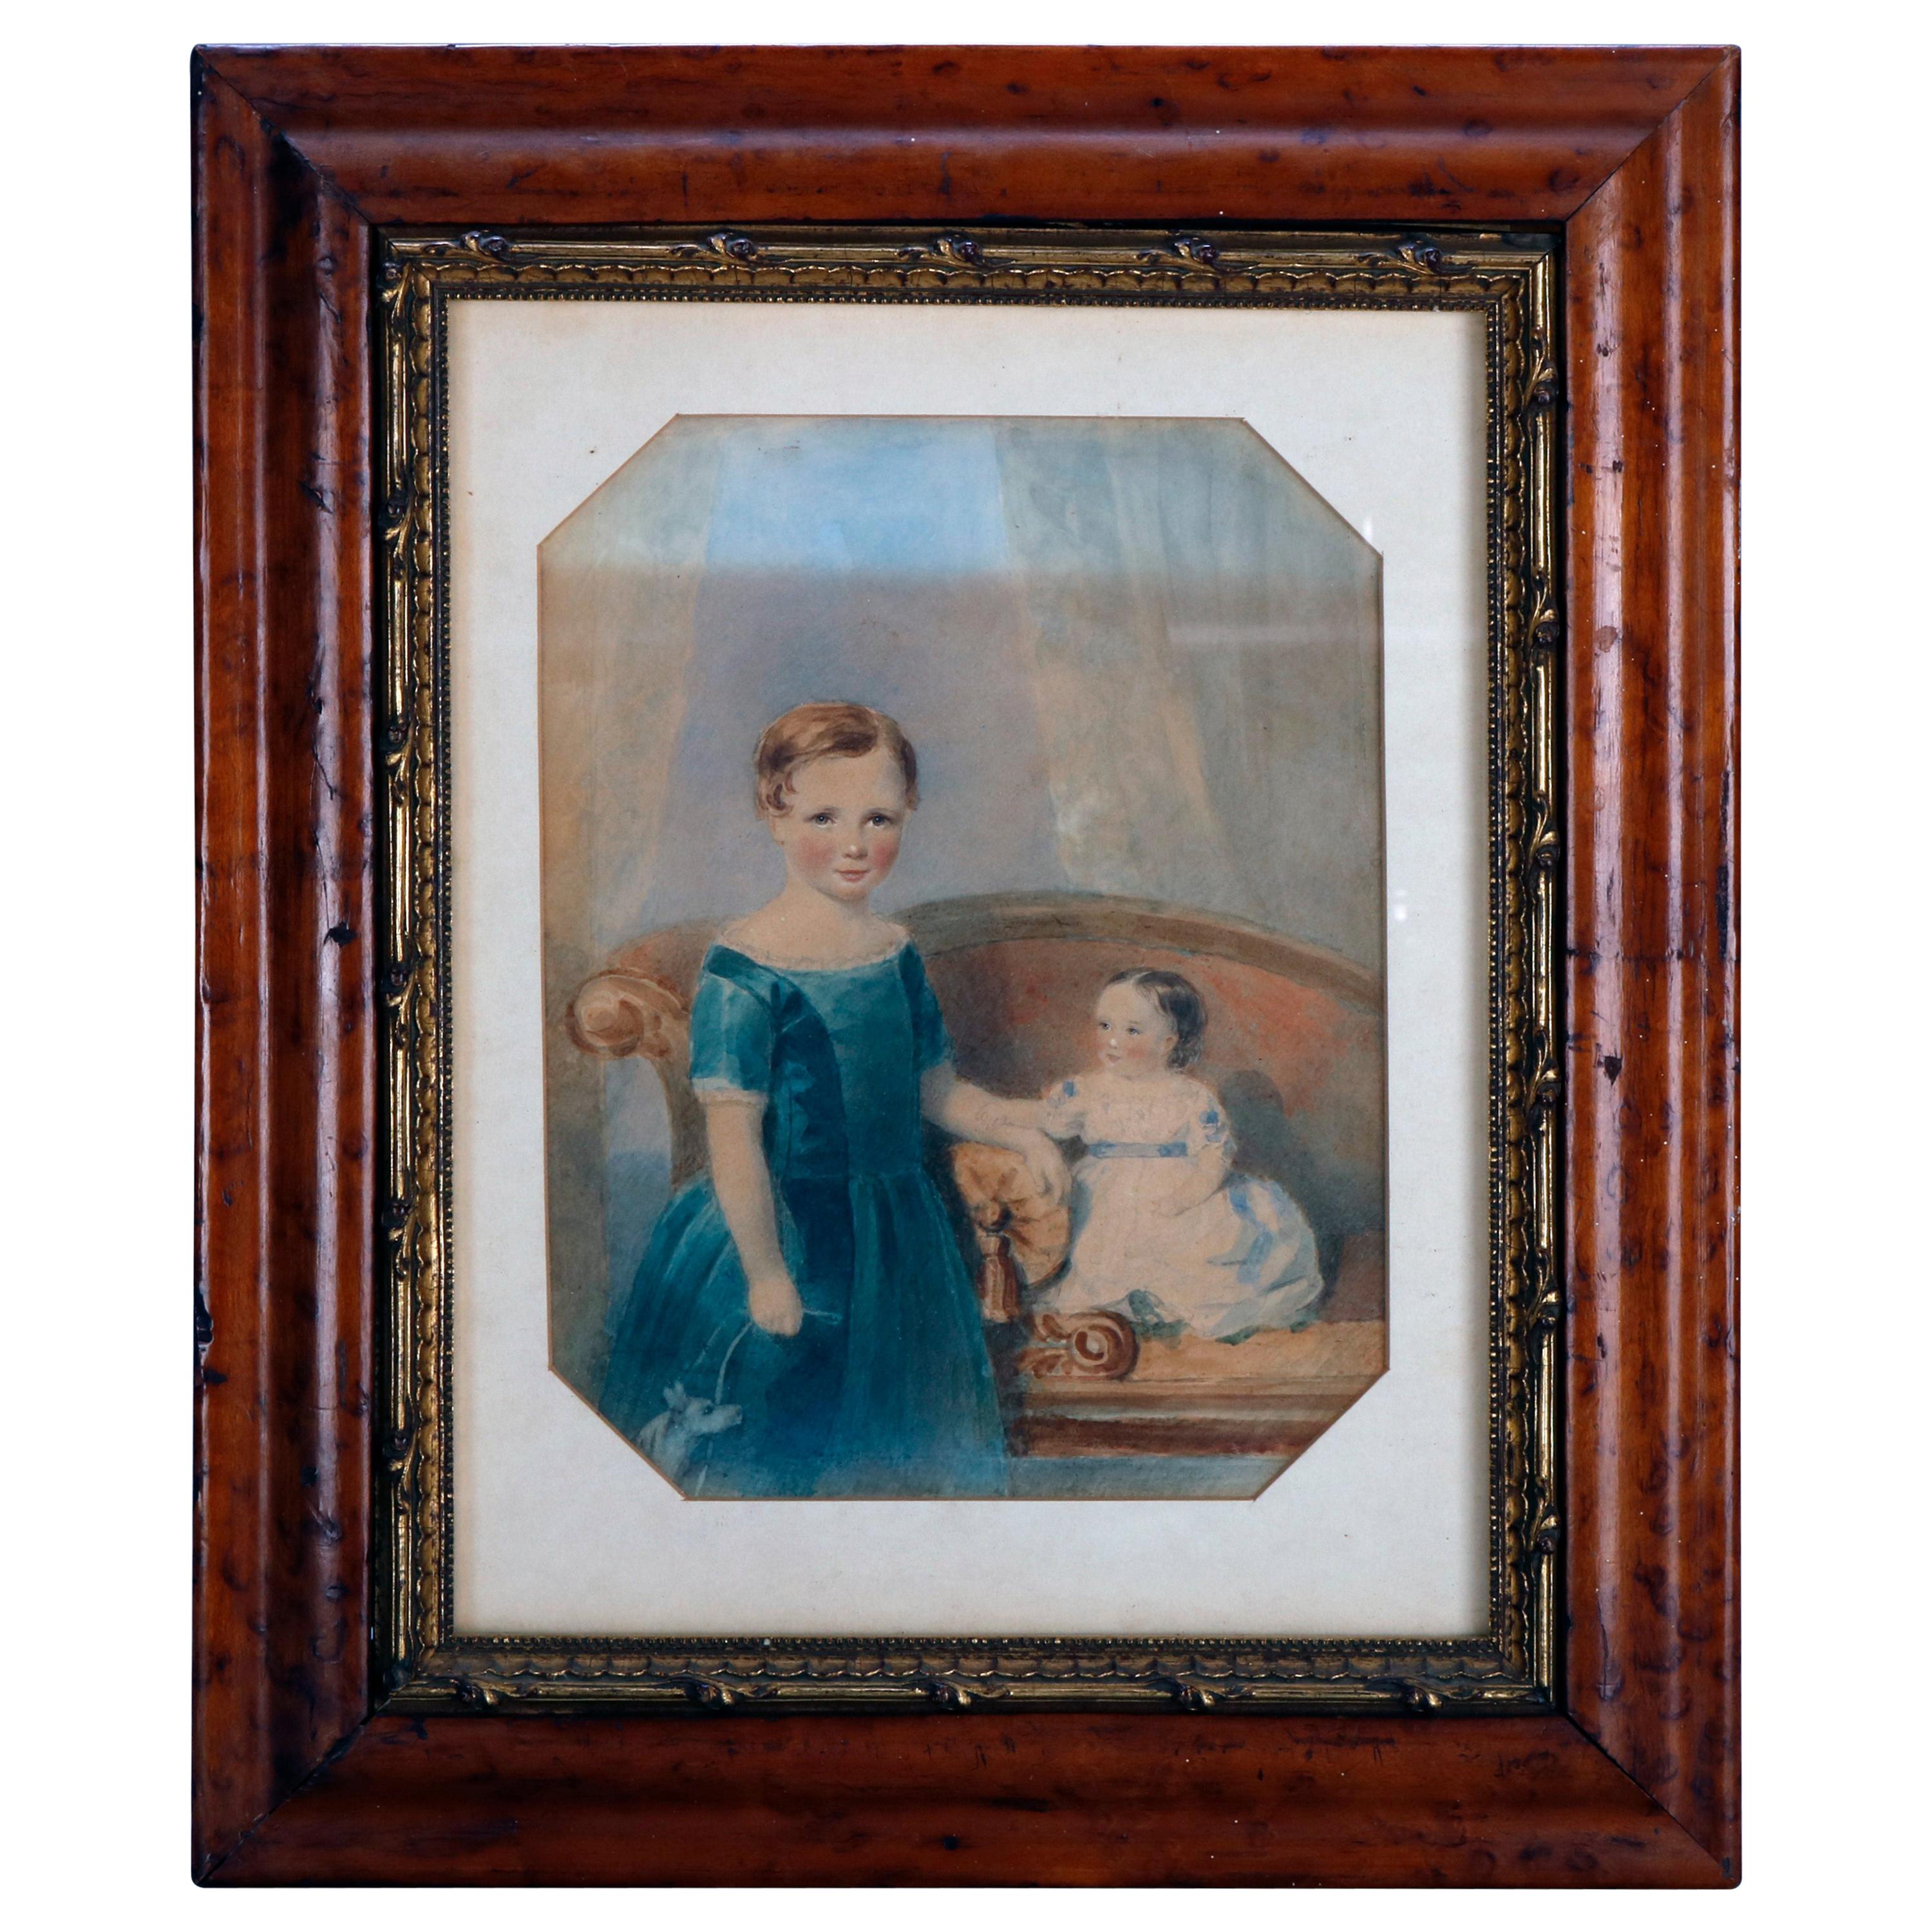 Early American Watercolor Portrait Painting of Child Siblings, circa 1840